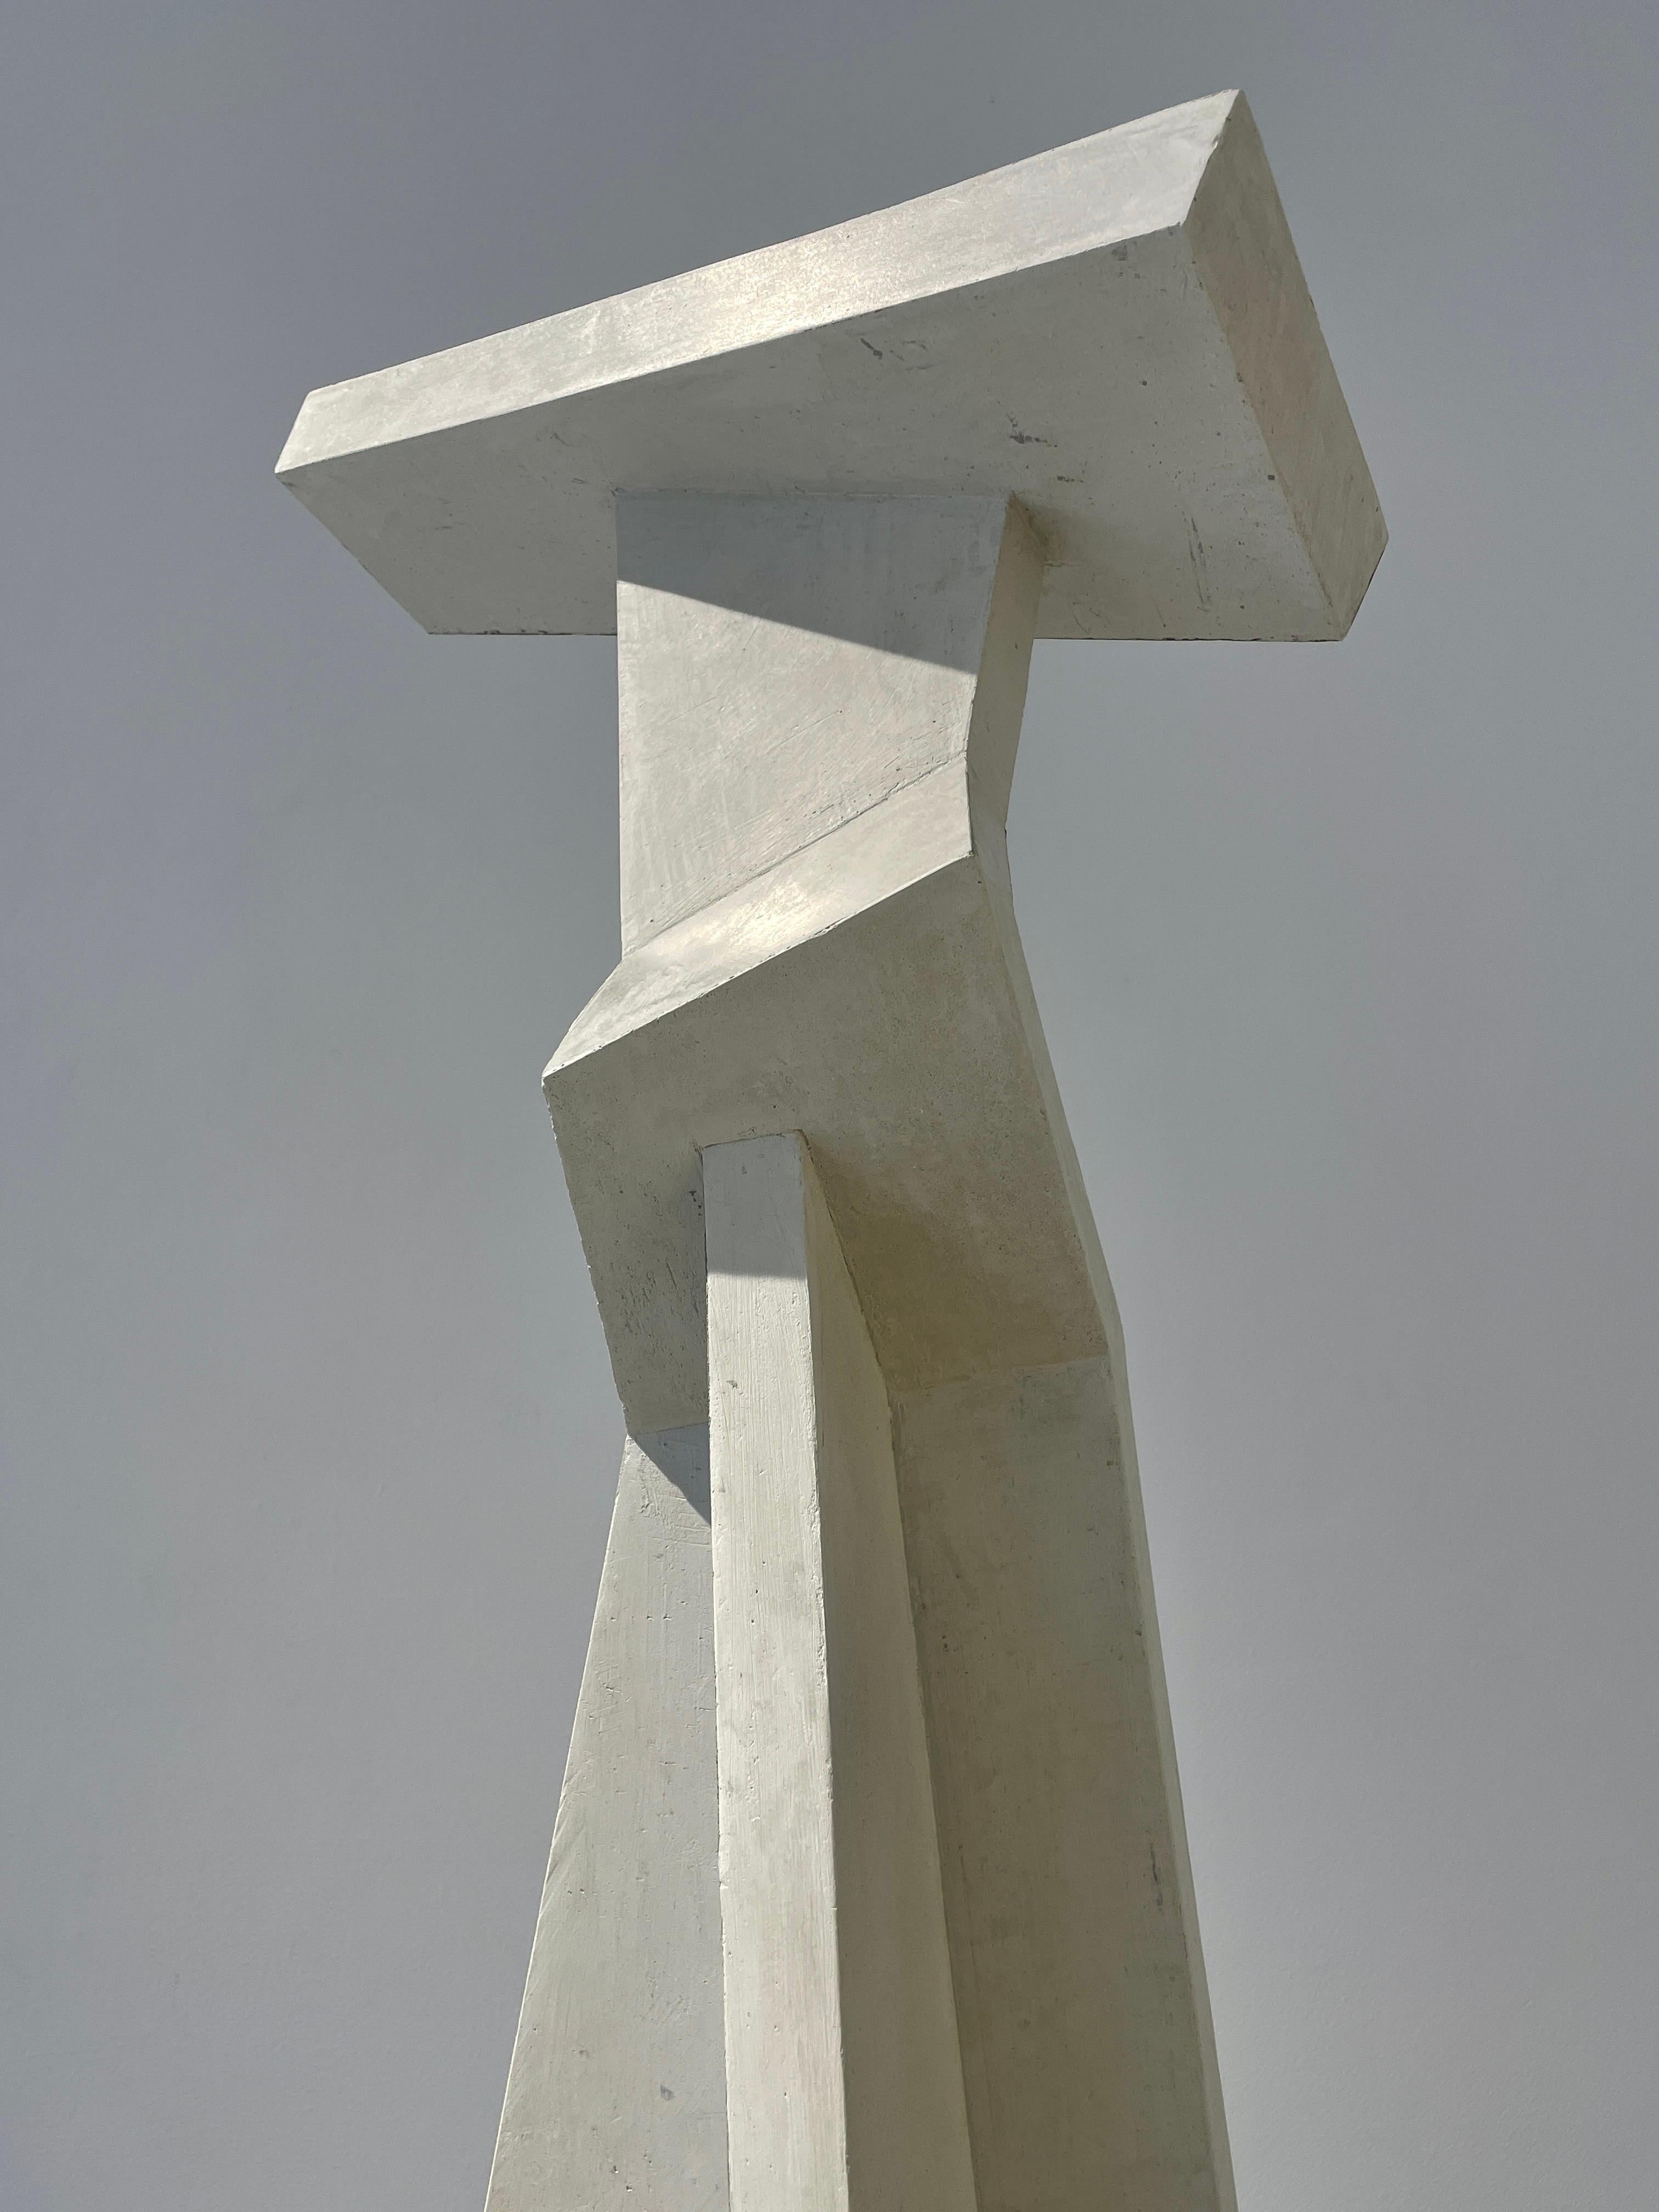 She Carried Water (Minimalist Standing Sculpture in Shades of White and Gray) For Sale 1